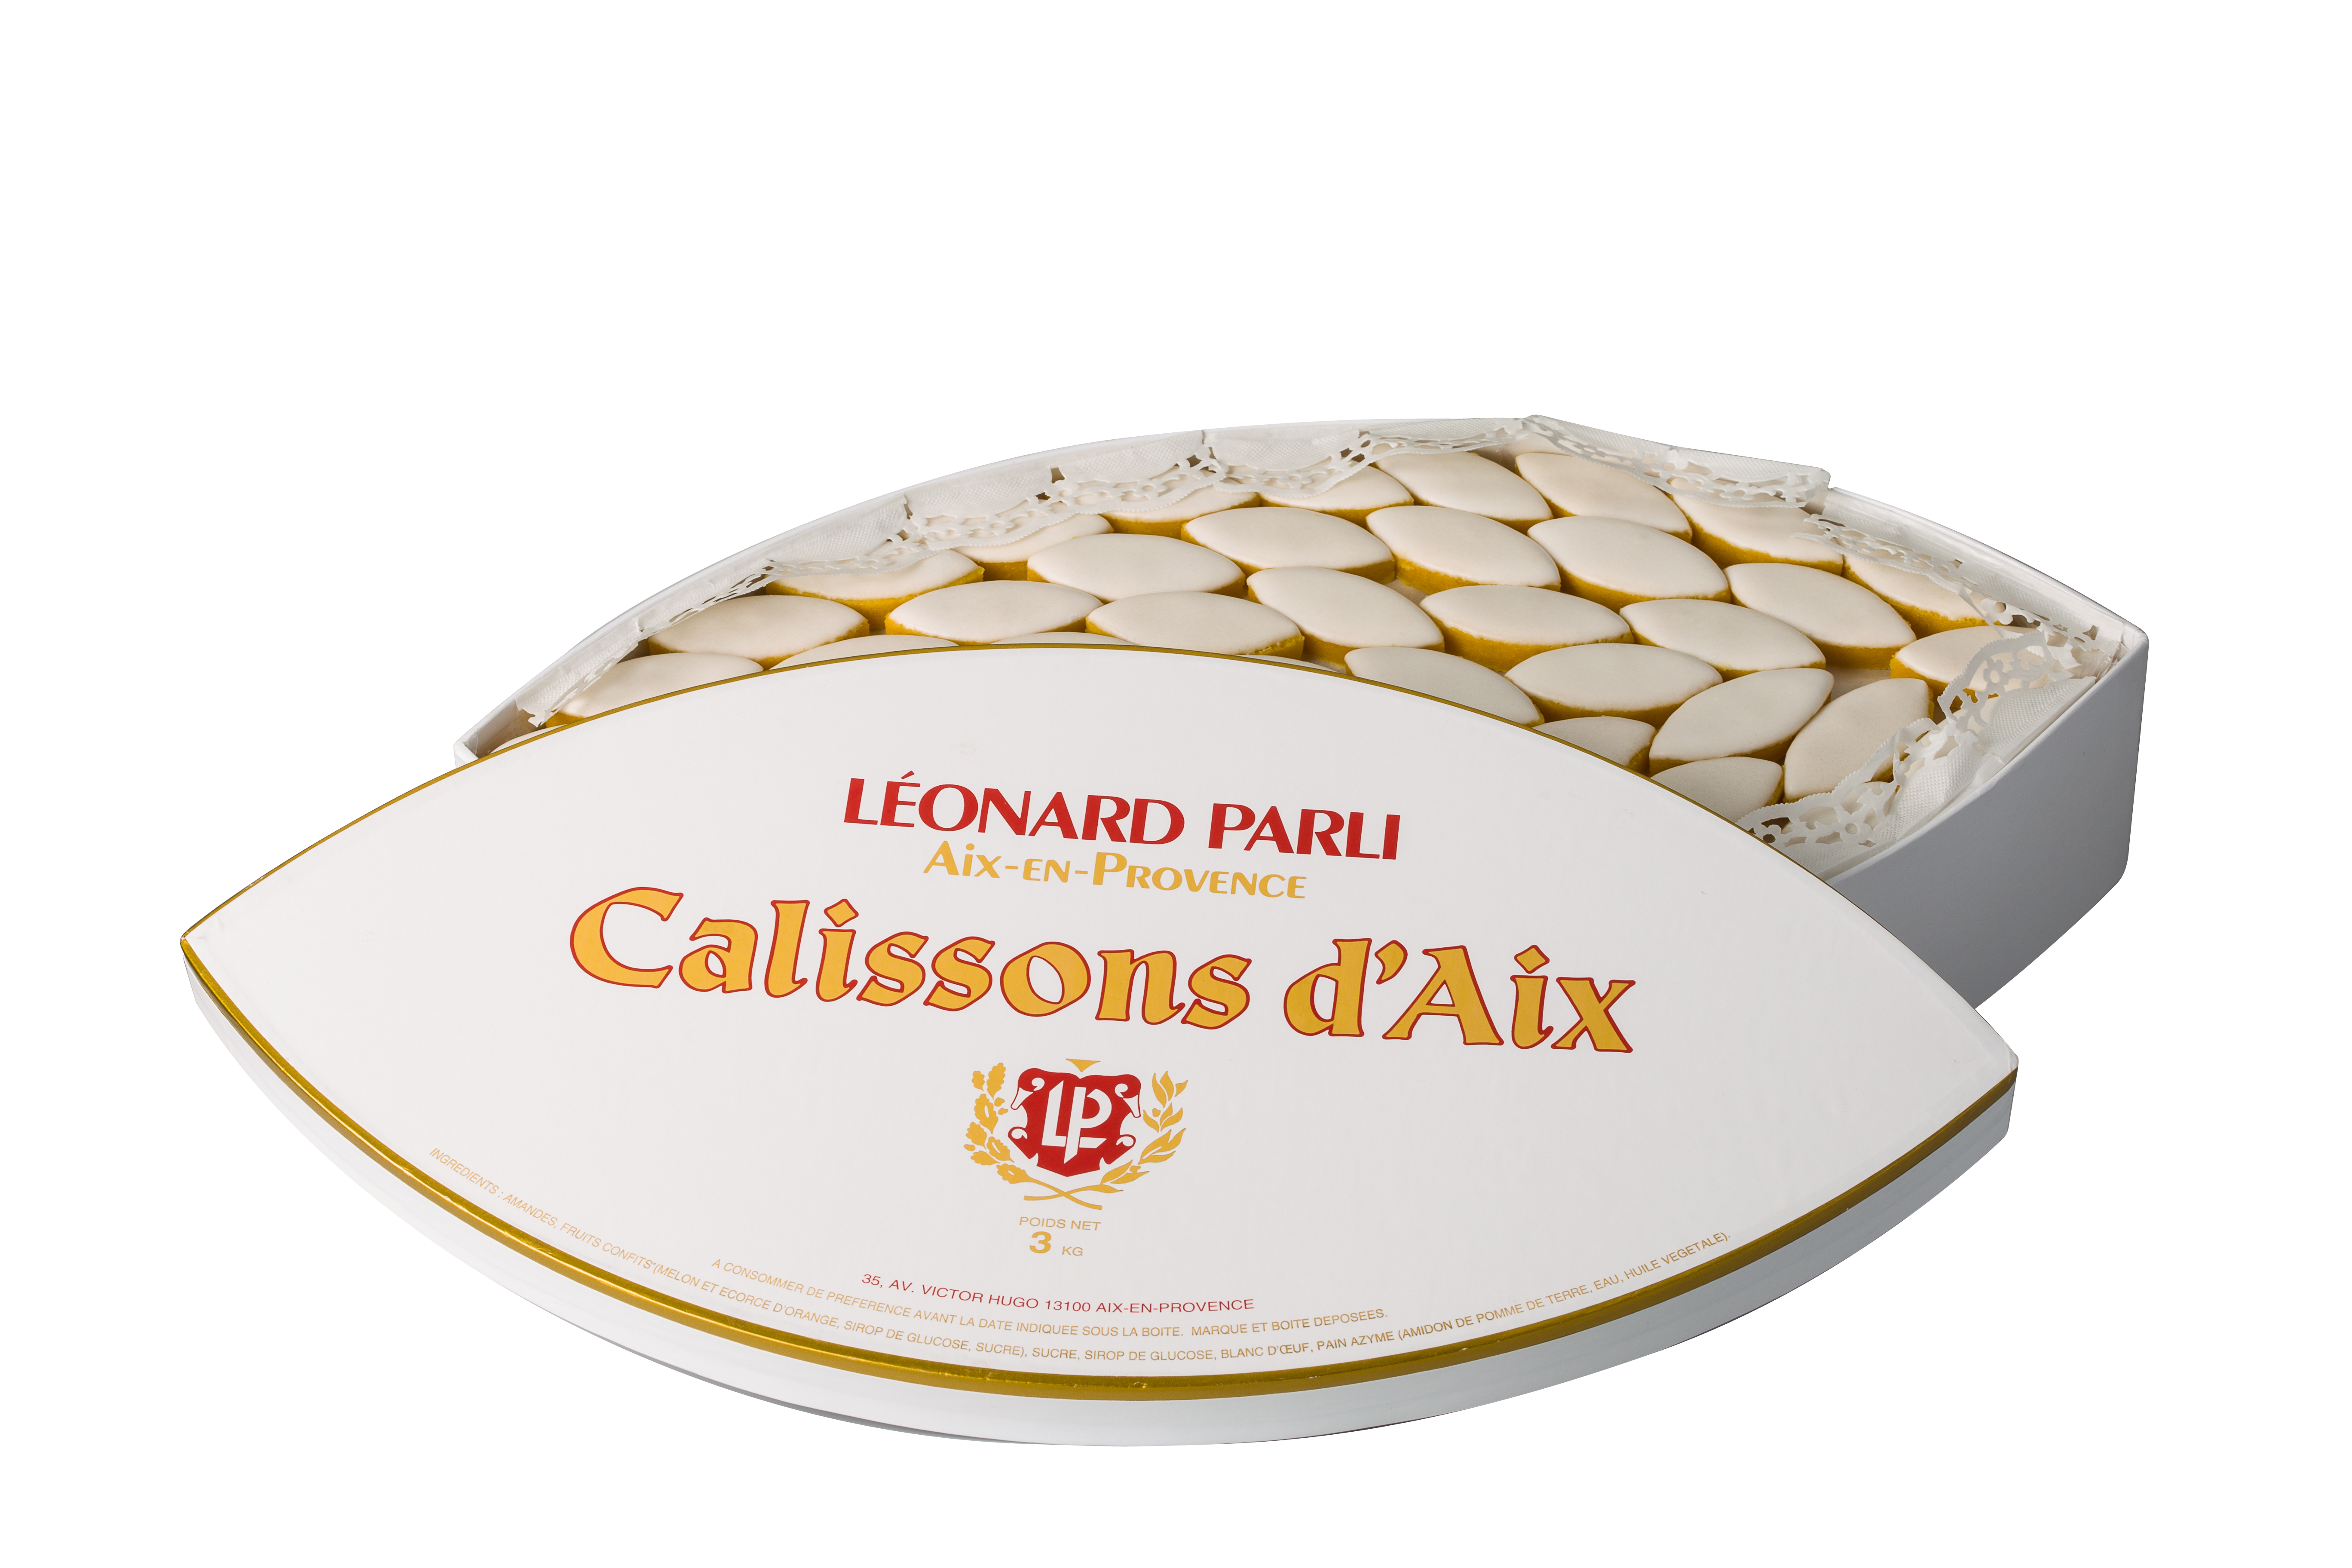 Calissons from Aix Grand Prix of France in traditional or fruity version